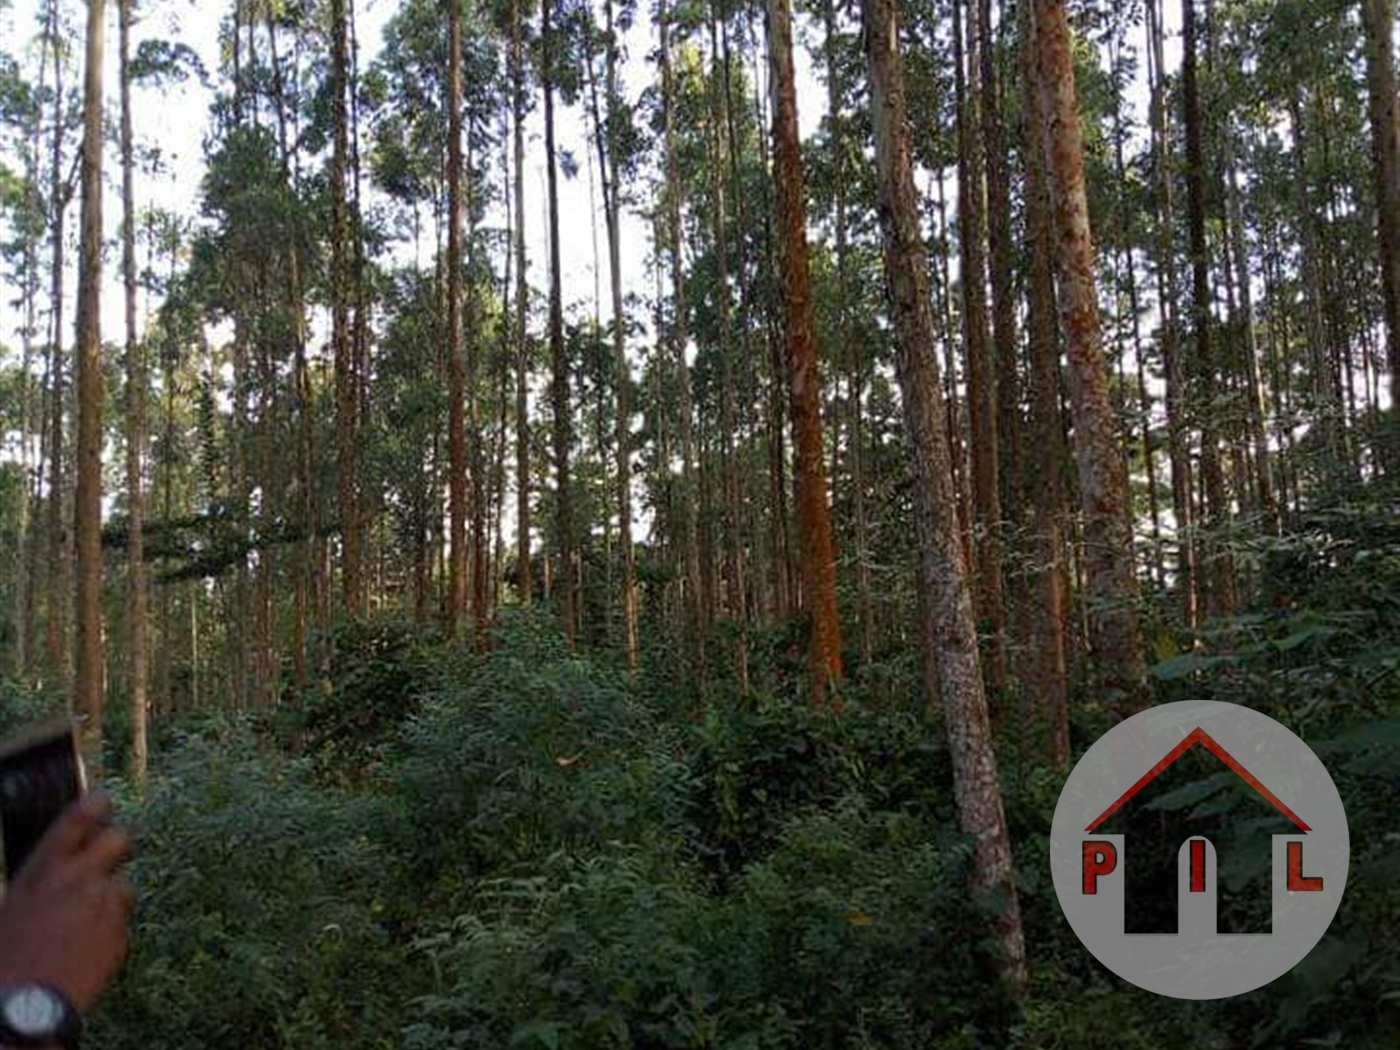 Agricultural Land for sale in Seeta Mukono